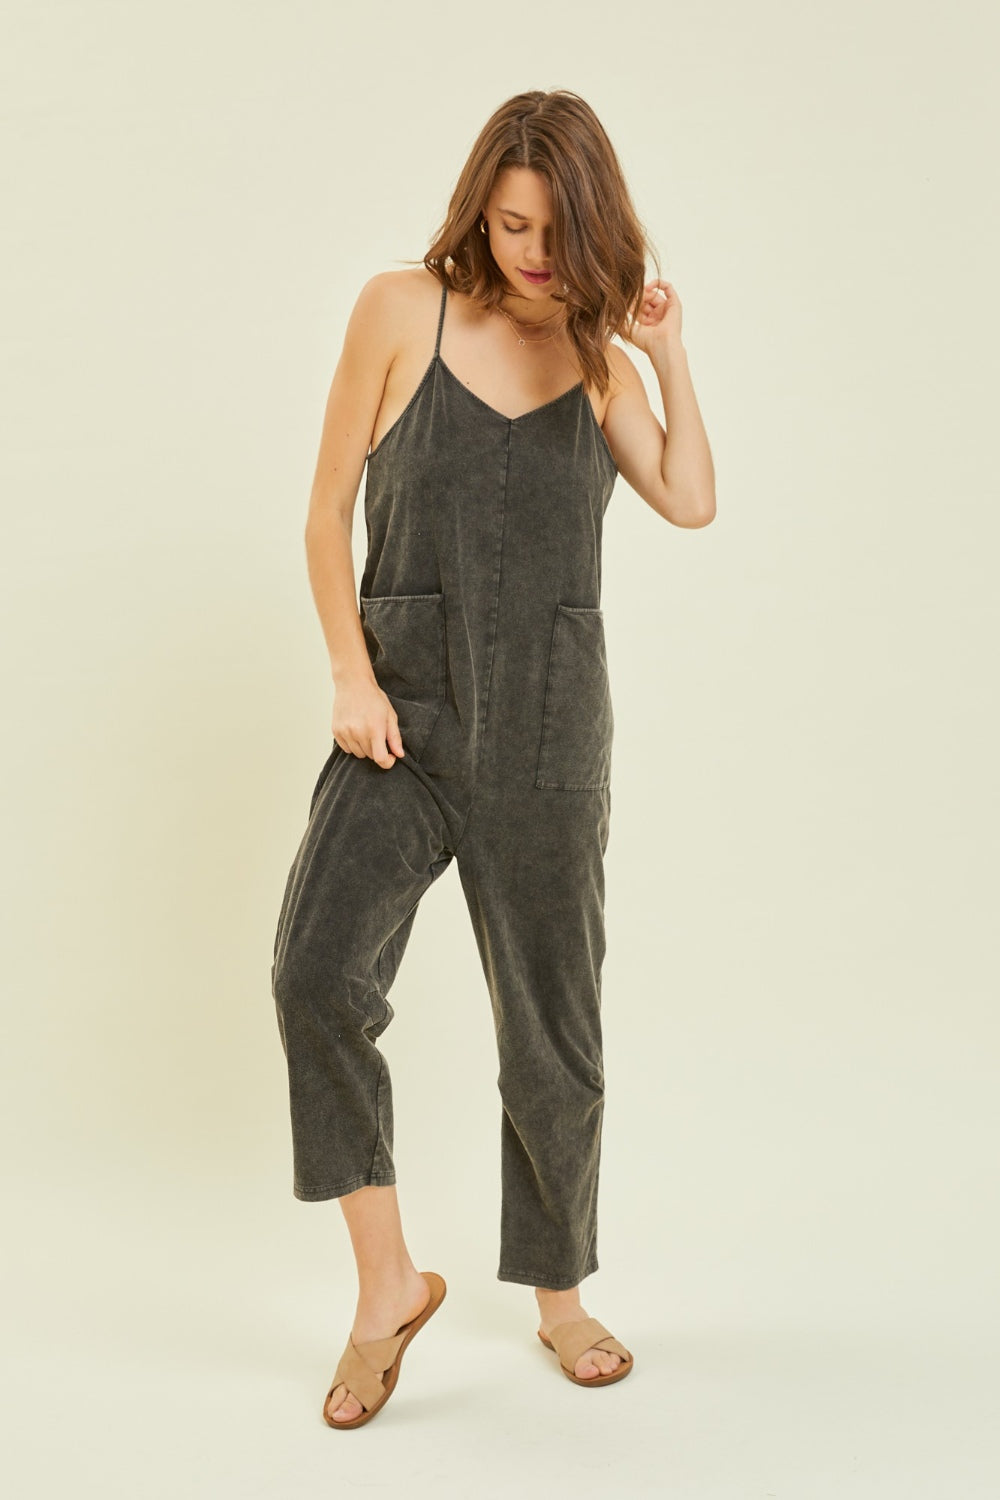 HEYSON Full Size Mineral-Washed-Oversized Jumpsuit with Pockets - Ultimate Blend of Comfort and Style